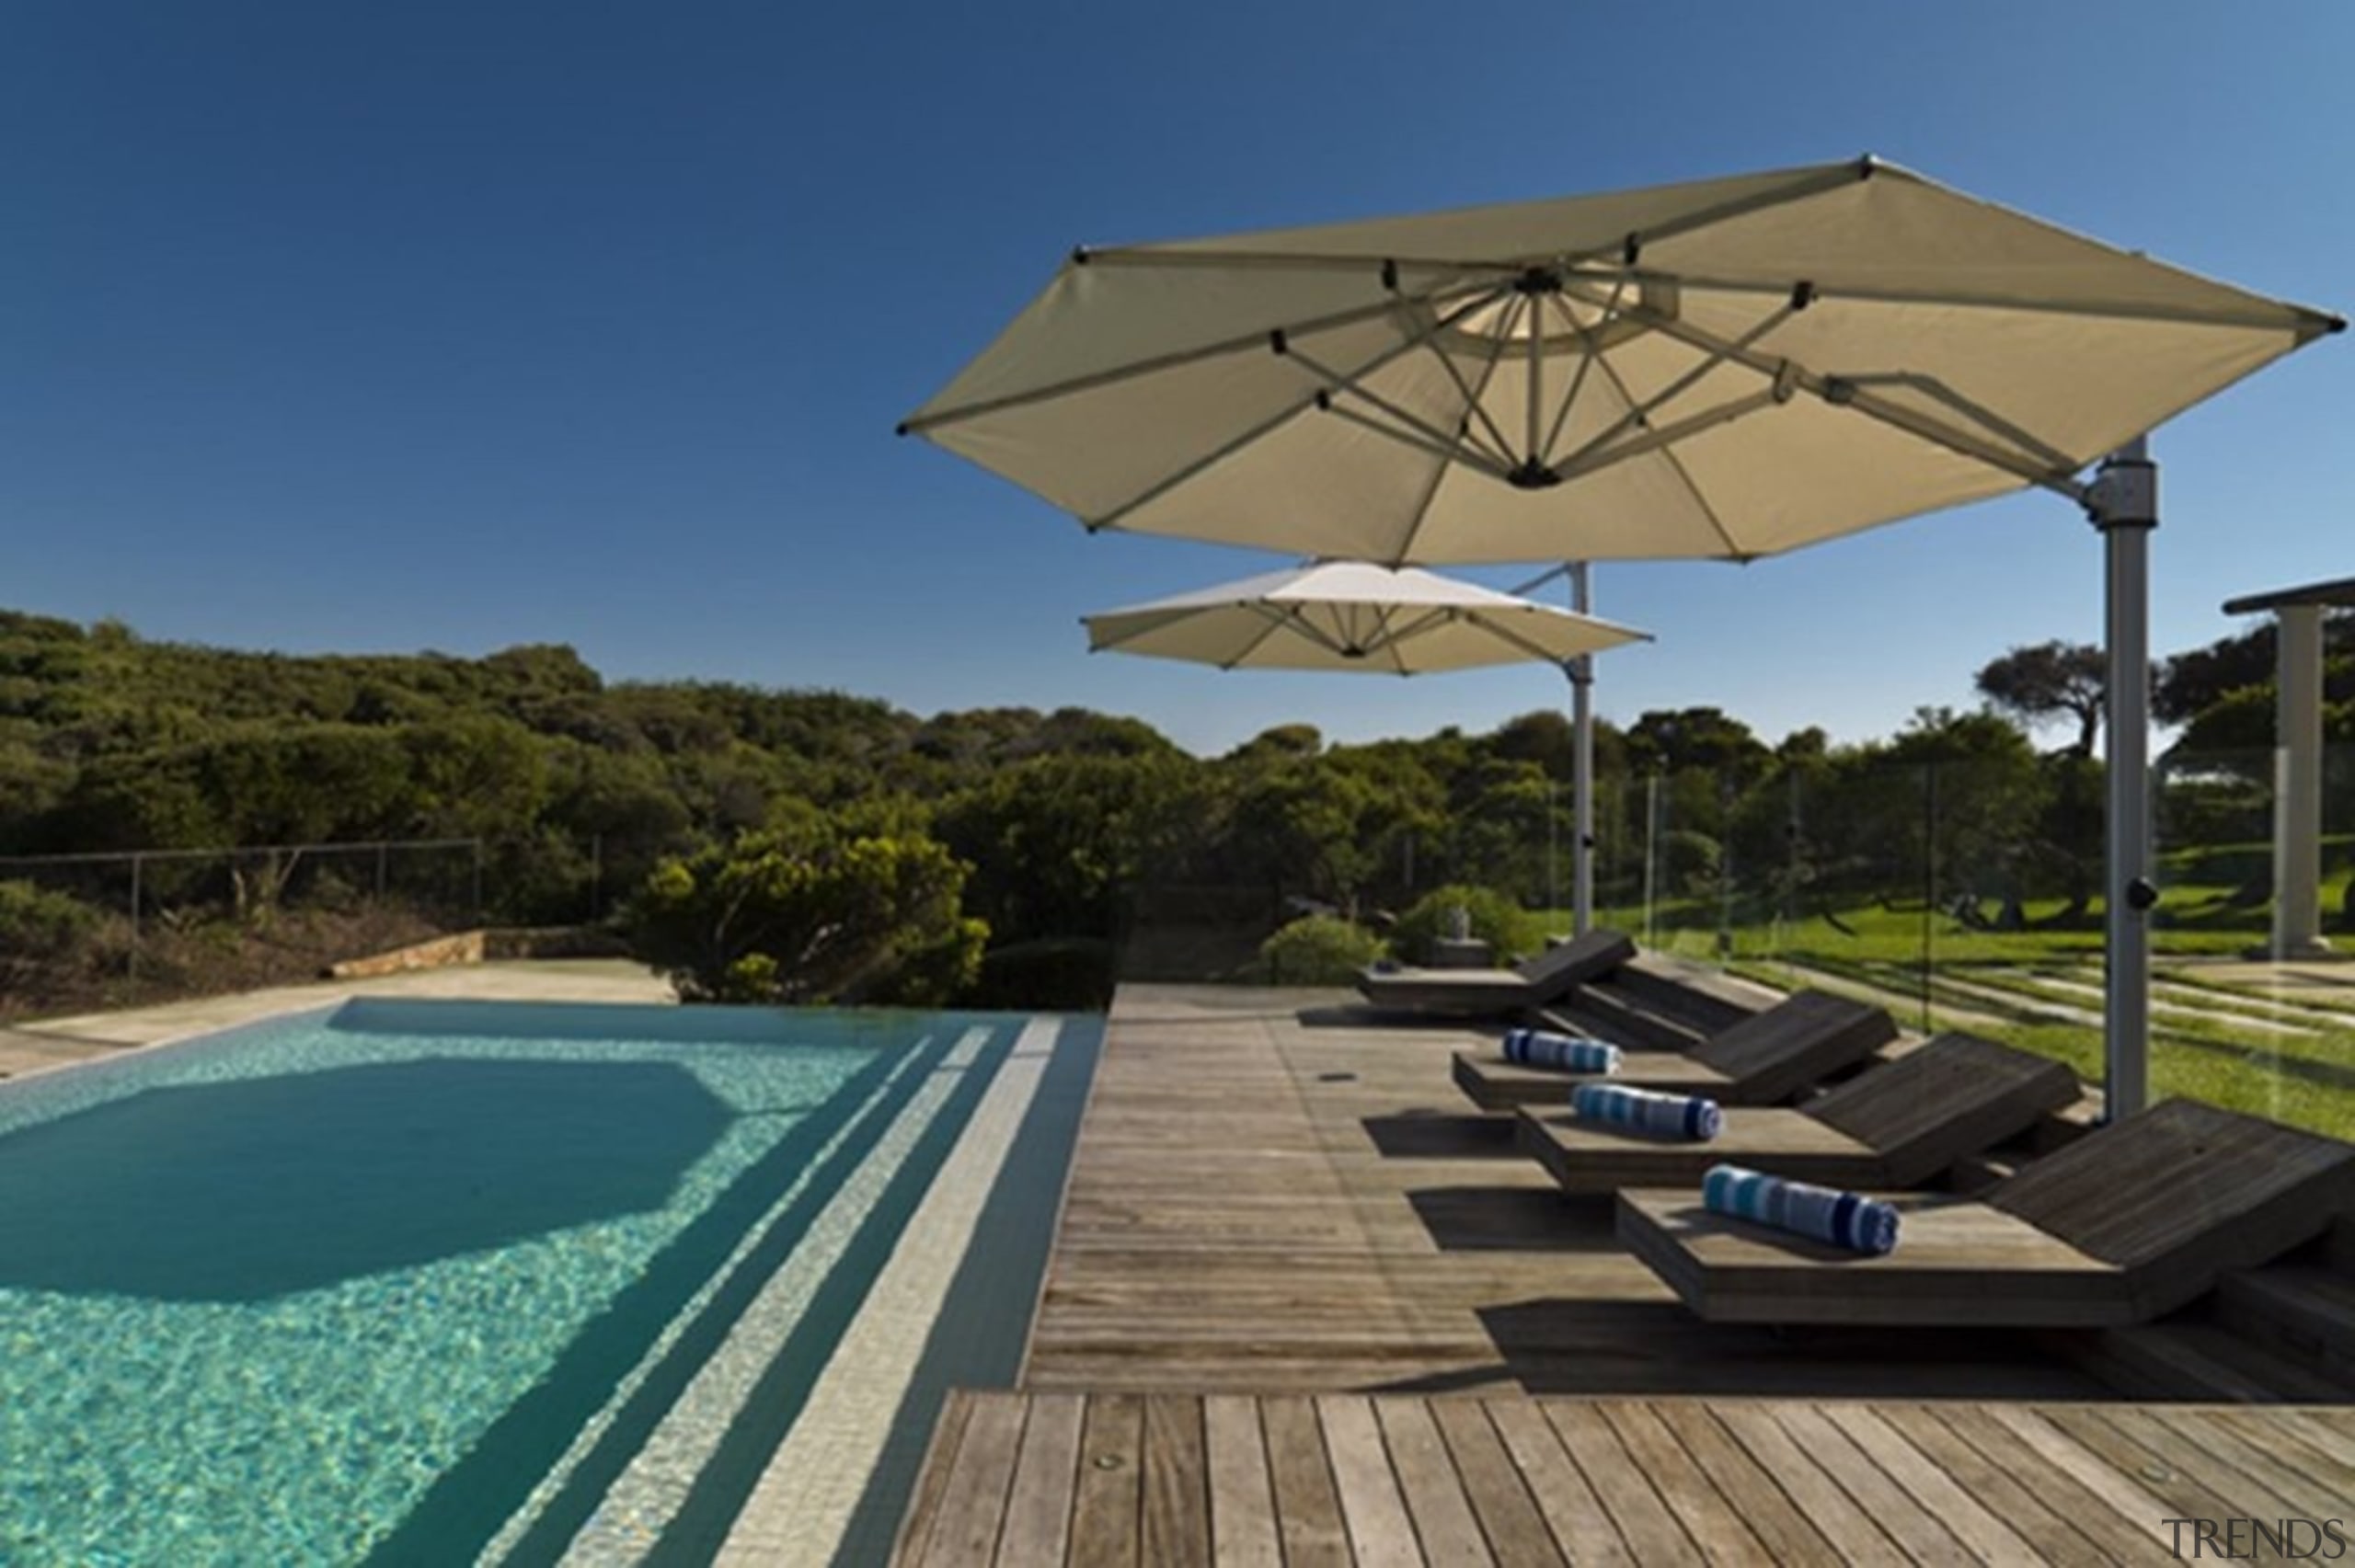 Riviera Cantilever Umbrella - estate | home | estate, home, house, leisure, outdoor furniture, property, real estate, shade, sunlounger, swimming pool, umbrella, vacation, brown